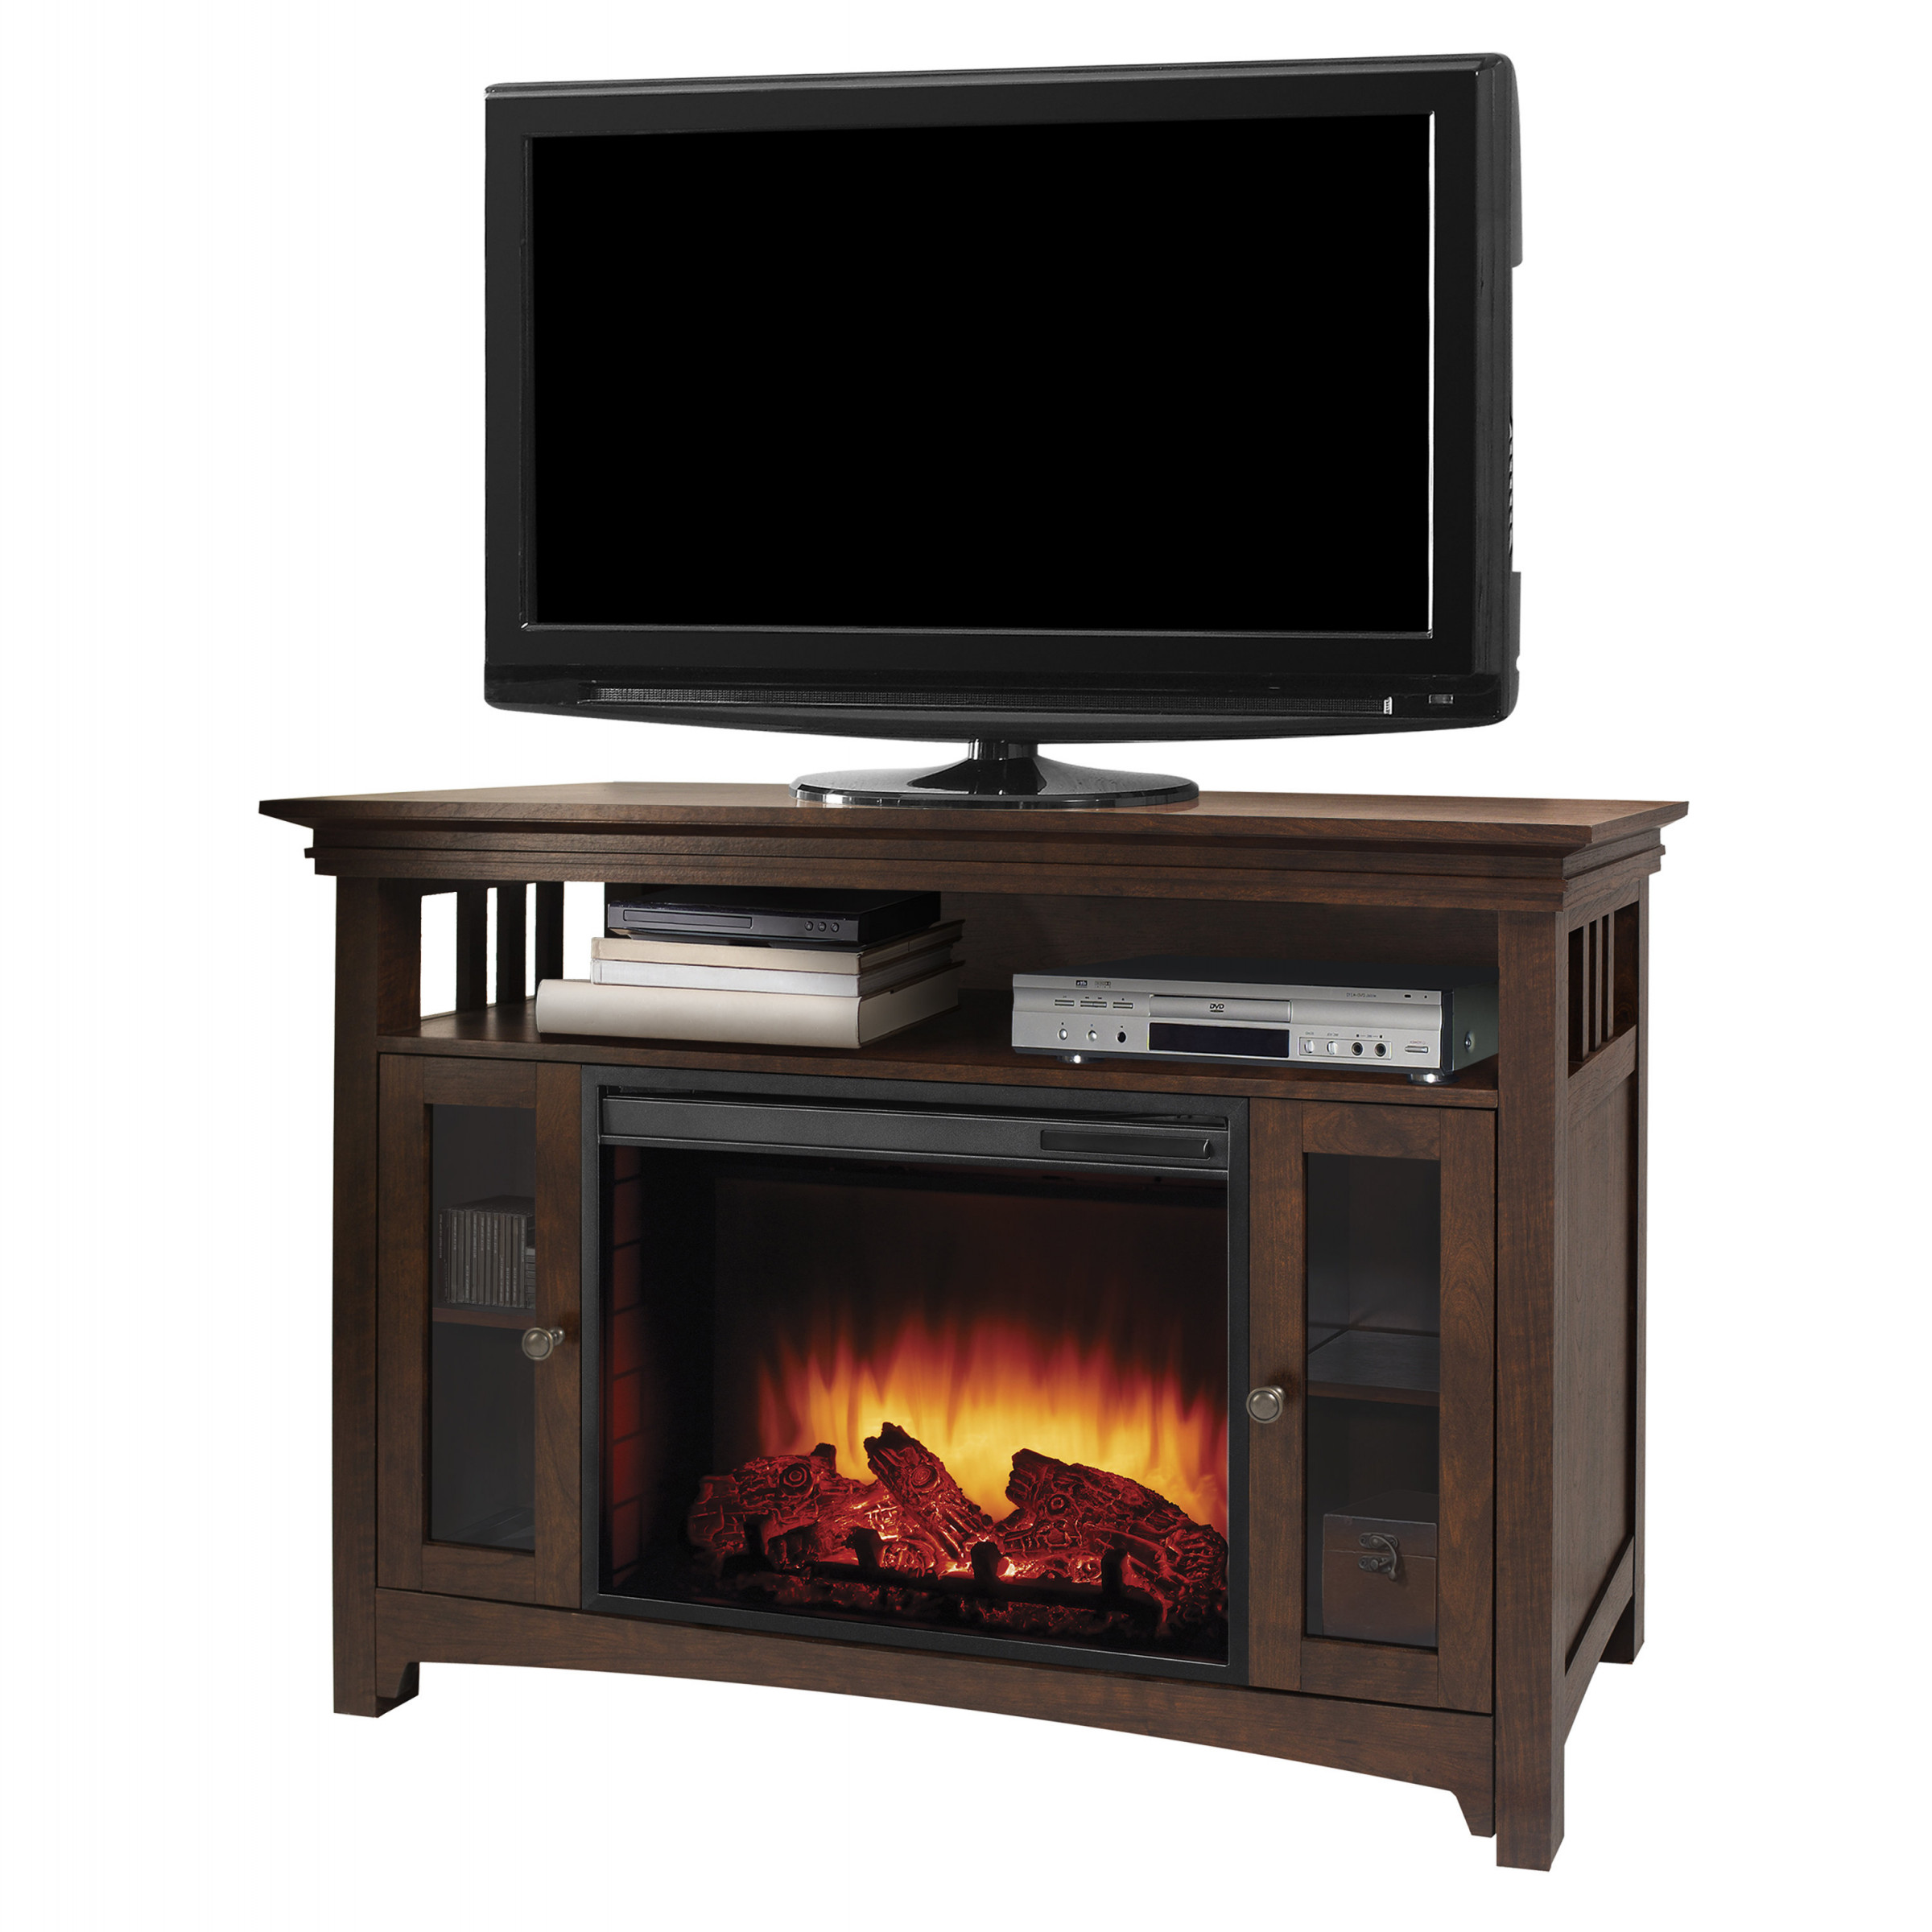 Rustic Electric Fireplace Unique 35 Minimaliste Electric Fireplace Tv Stand